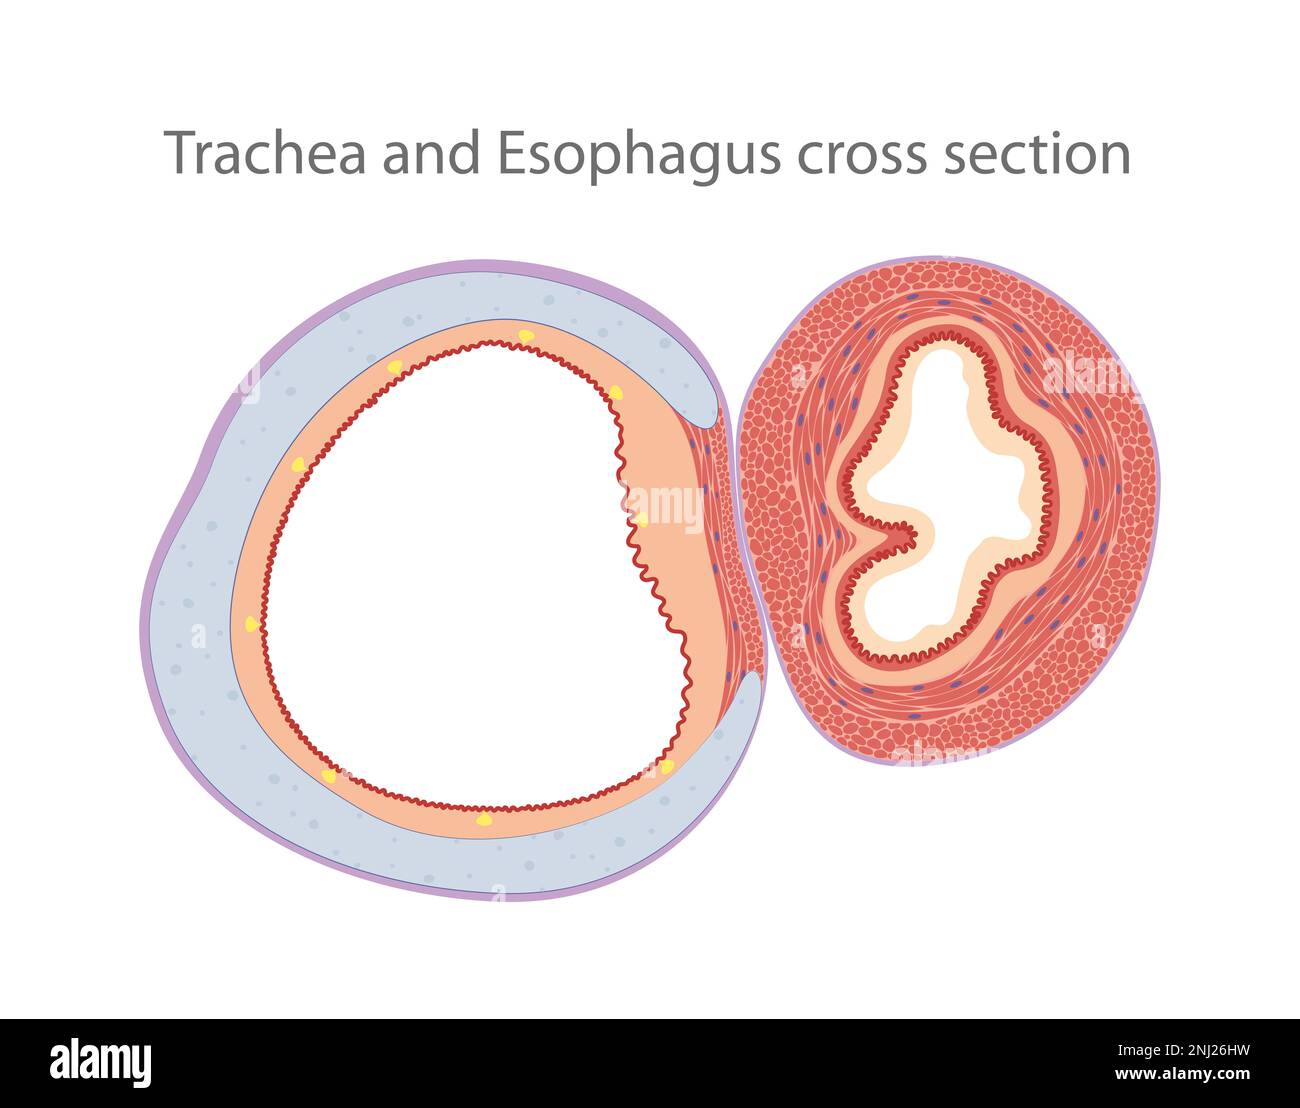 Trachea and Esophagus cross section Stock Photo